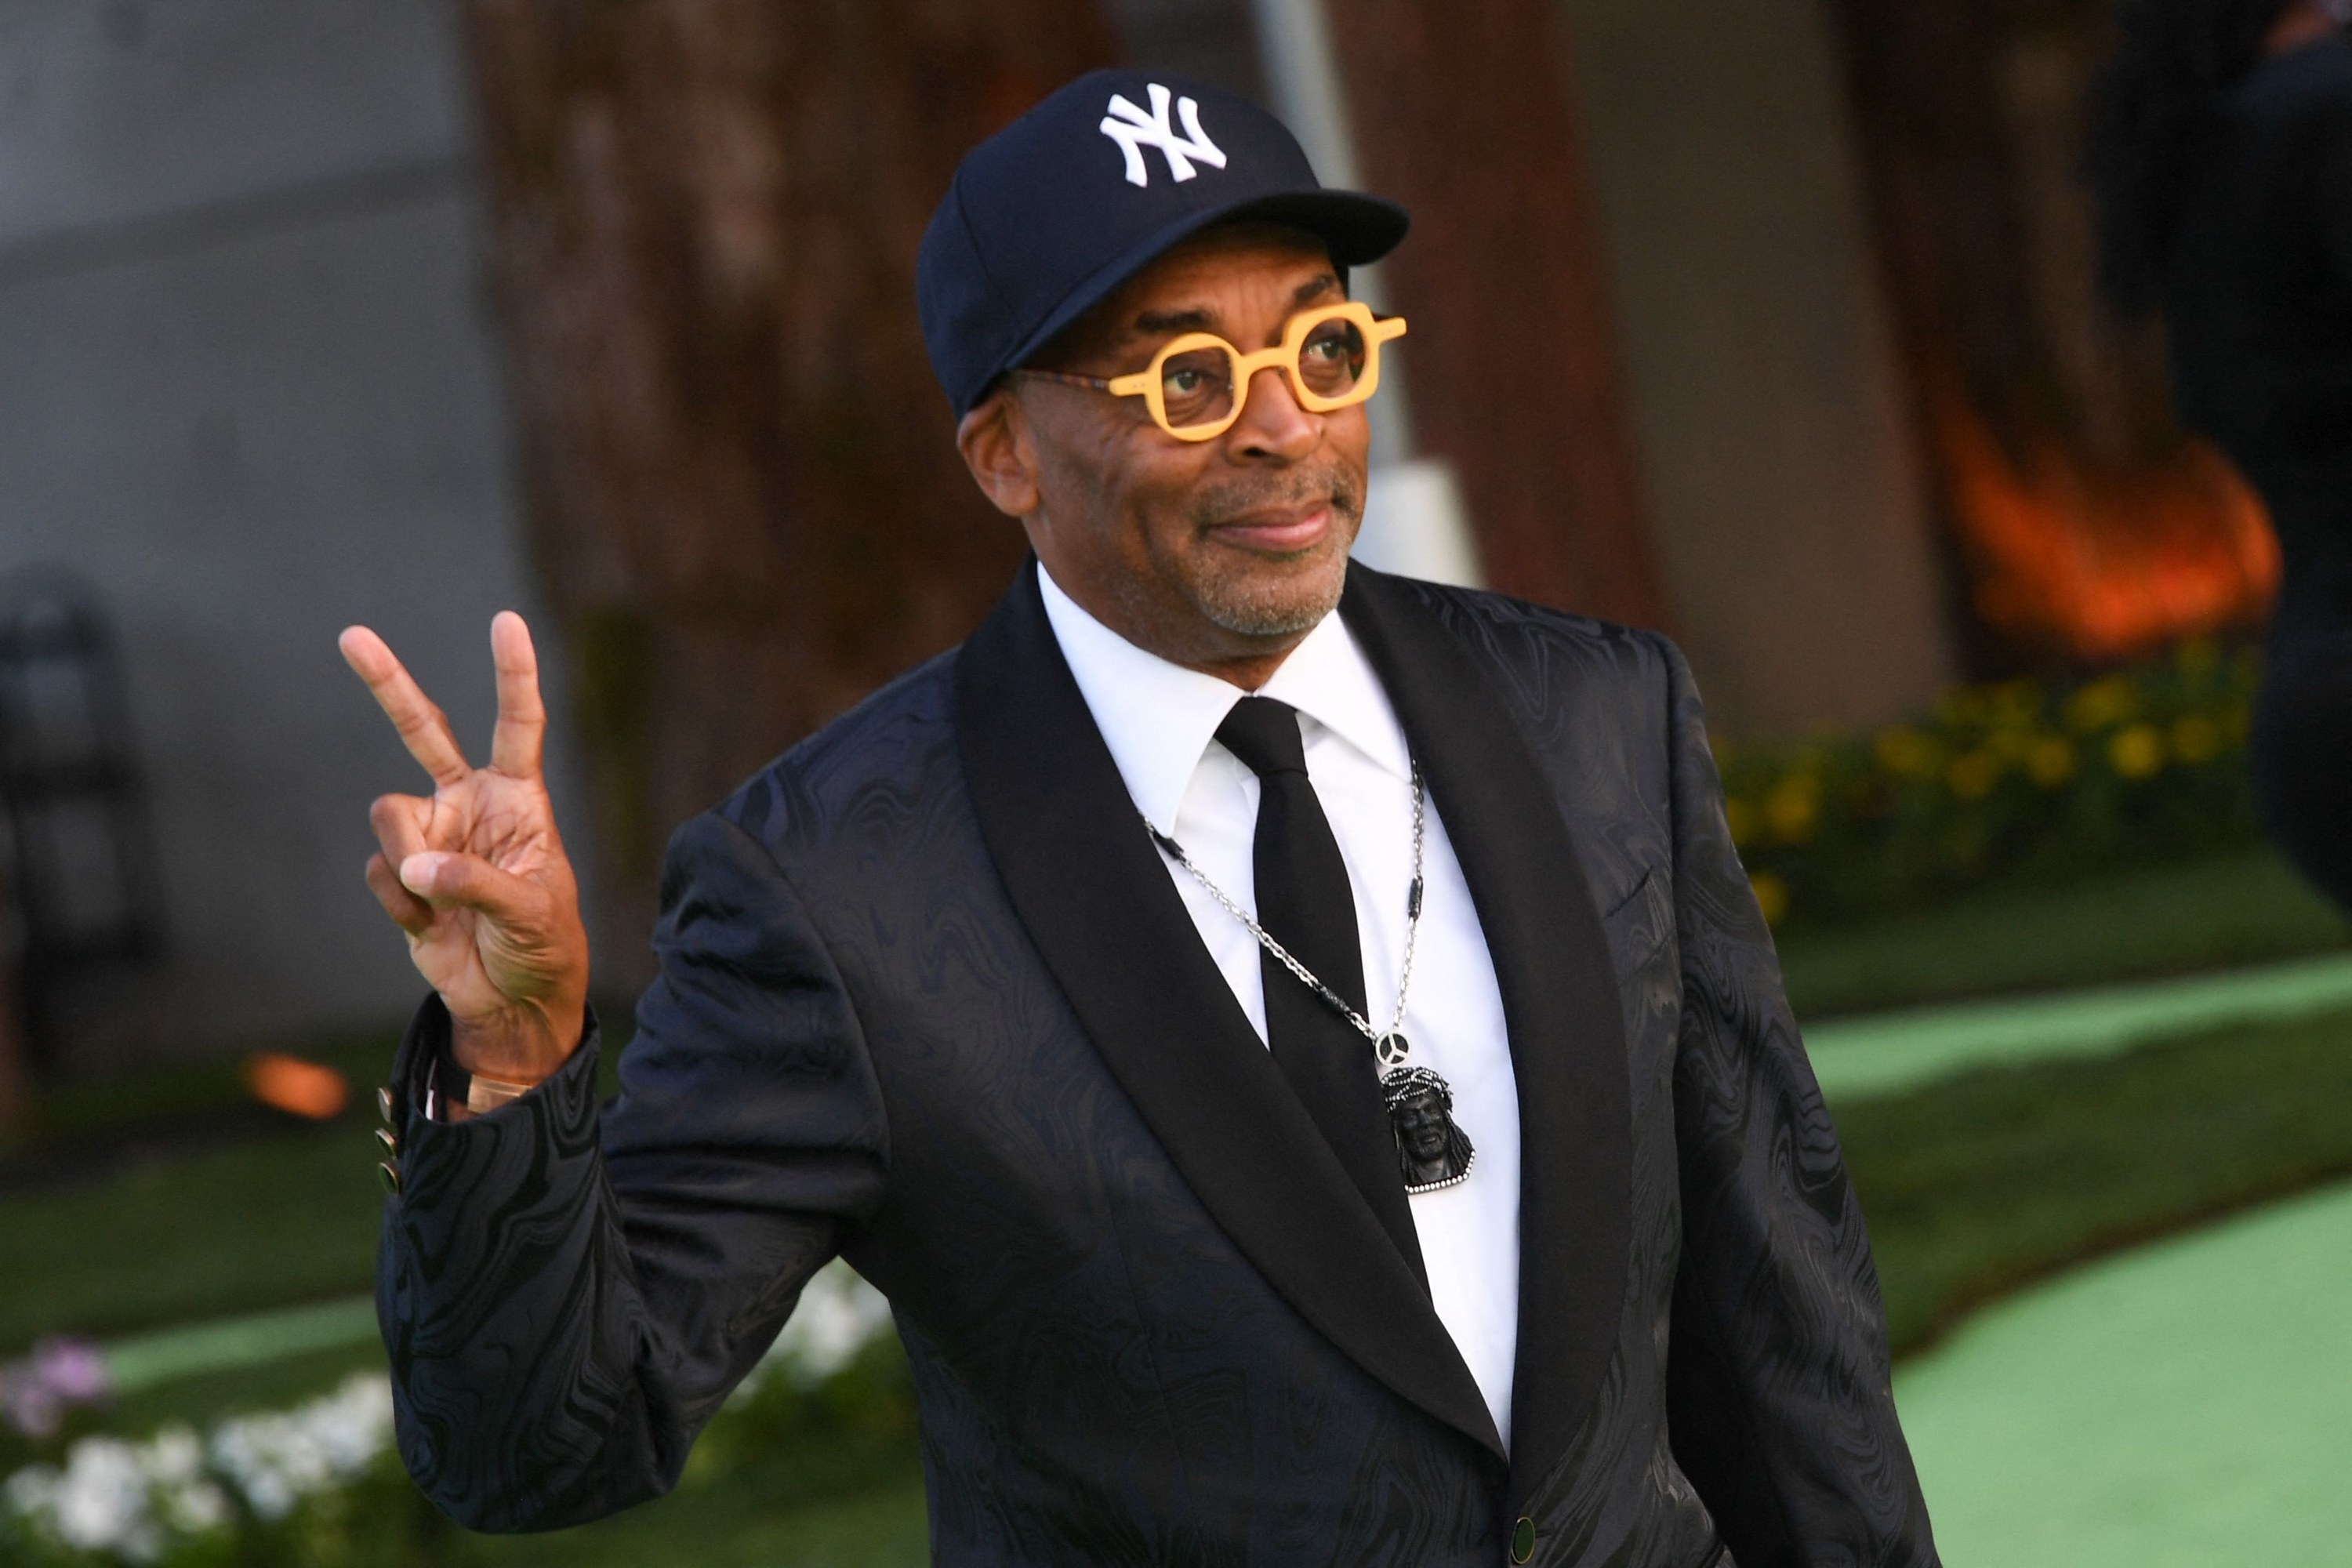 Spike Lee attends the Academy Museum of Motion Pictures opening gala on September 25, 2021